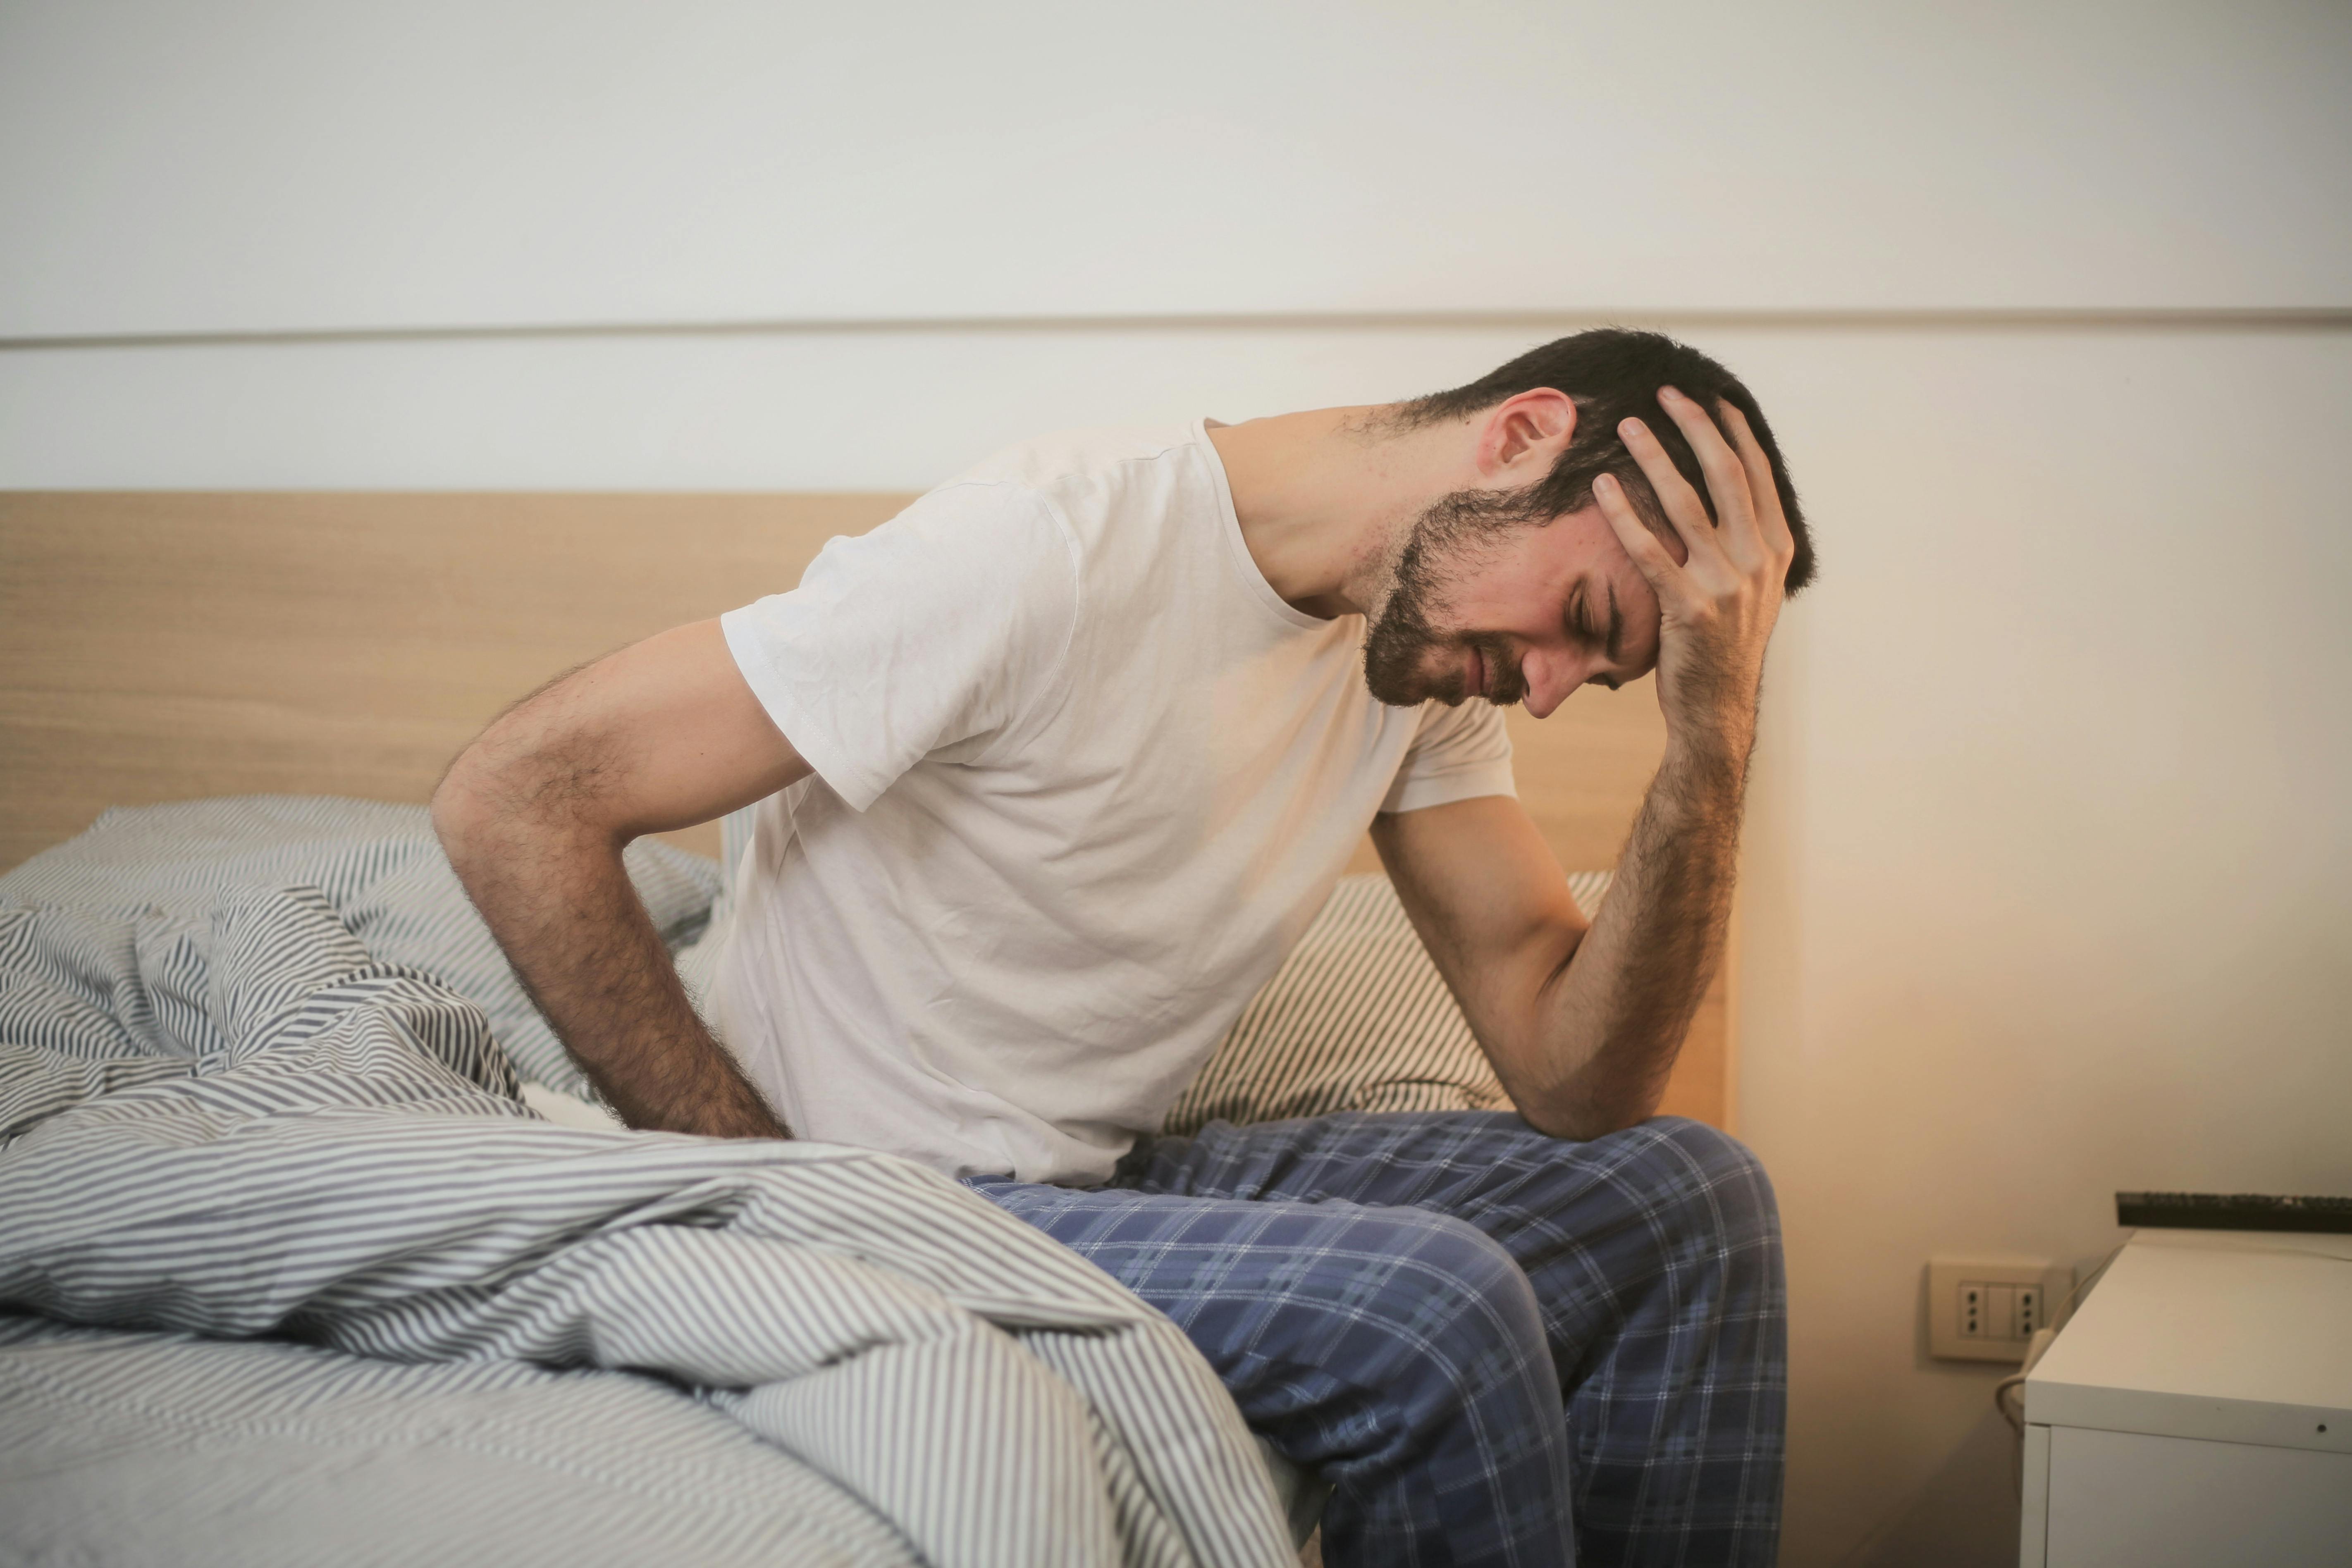 A frustrated man sitting on his bed and holding his head | Source: Pexels